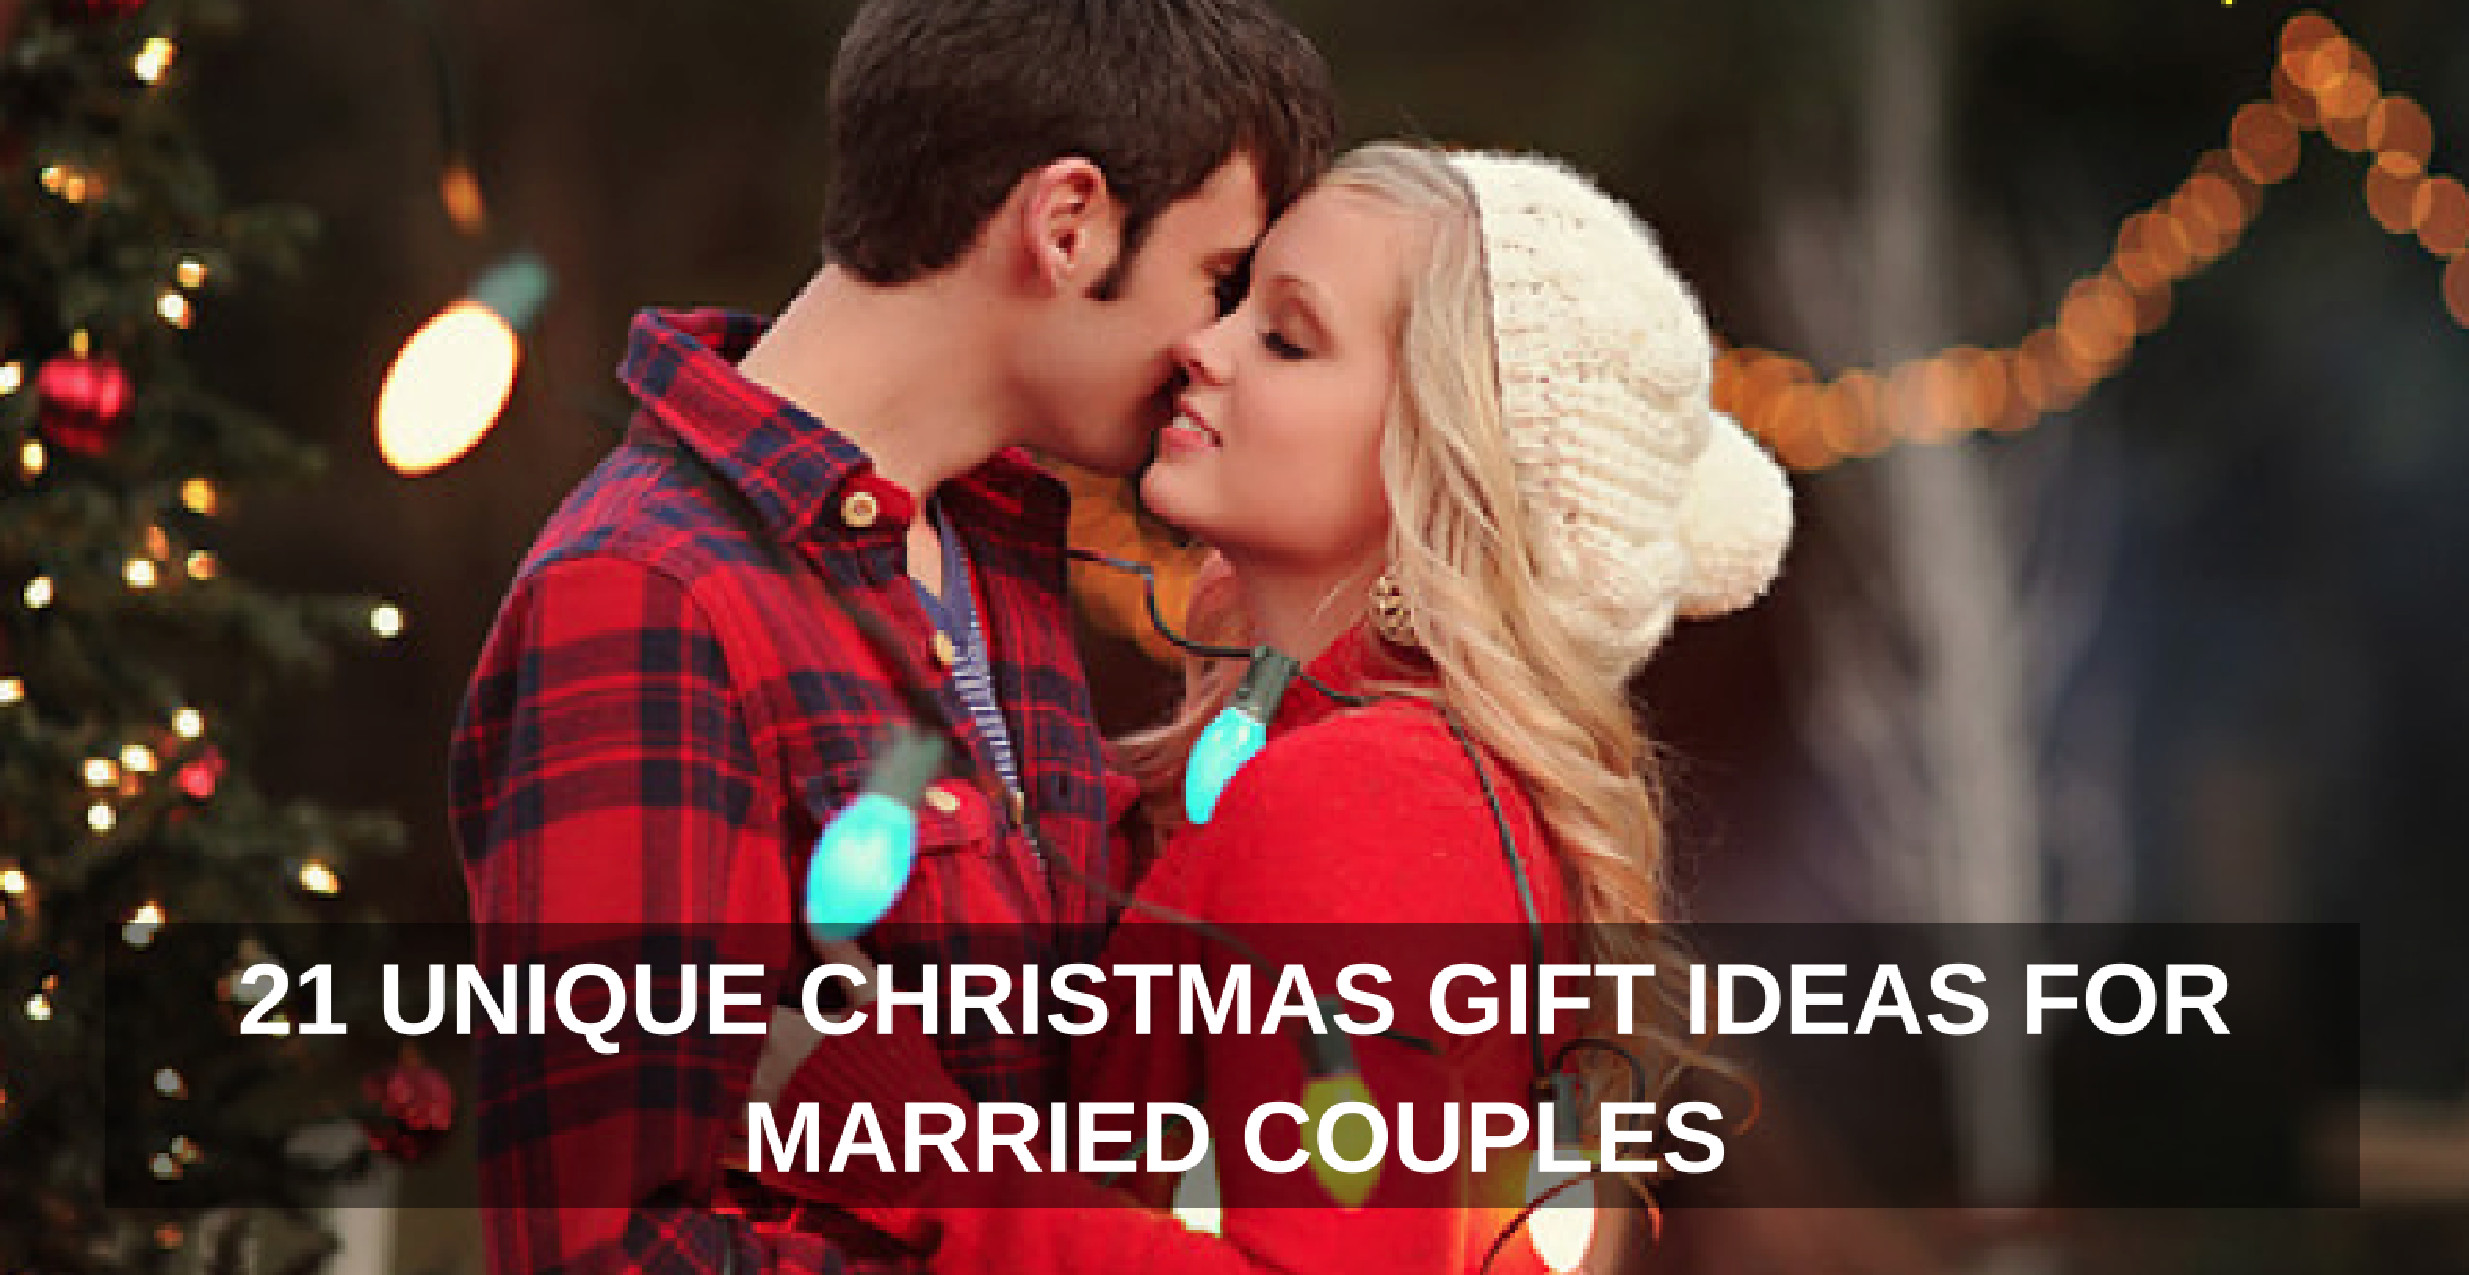 Christmas Gift Ideas Married Couple
 21 Unique Christmas Gift Ideas for Married Couples